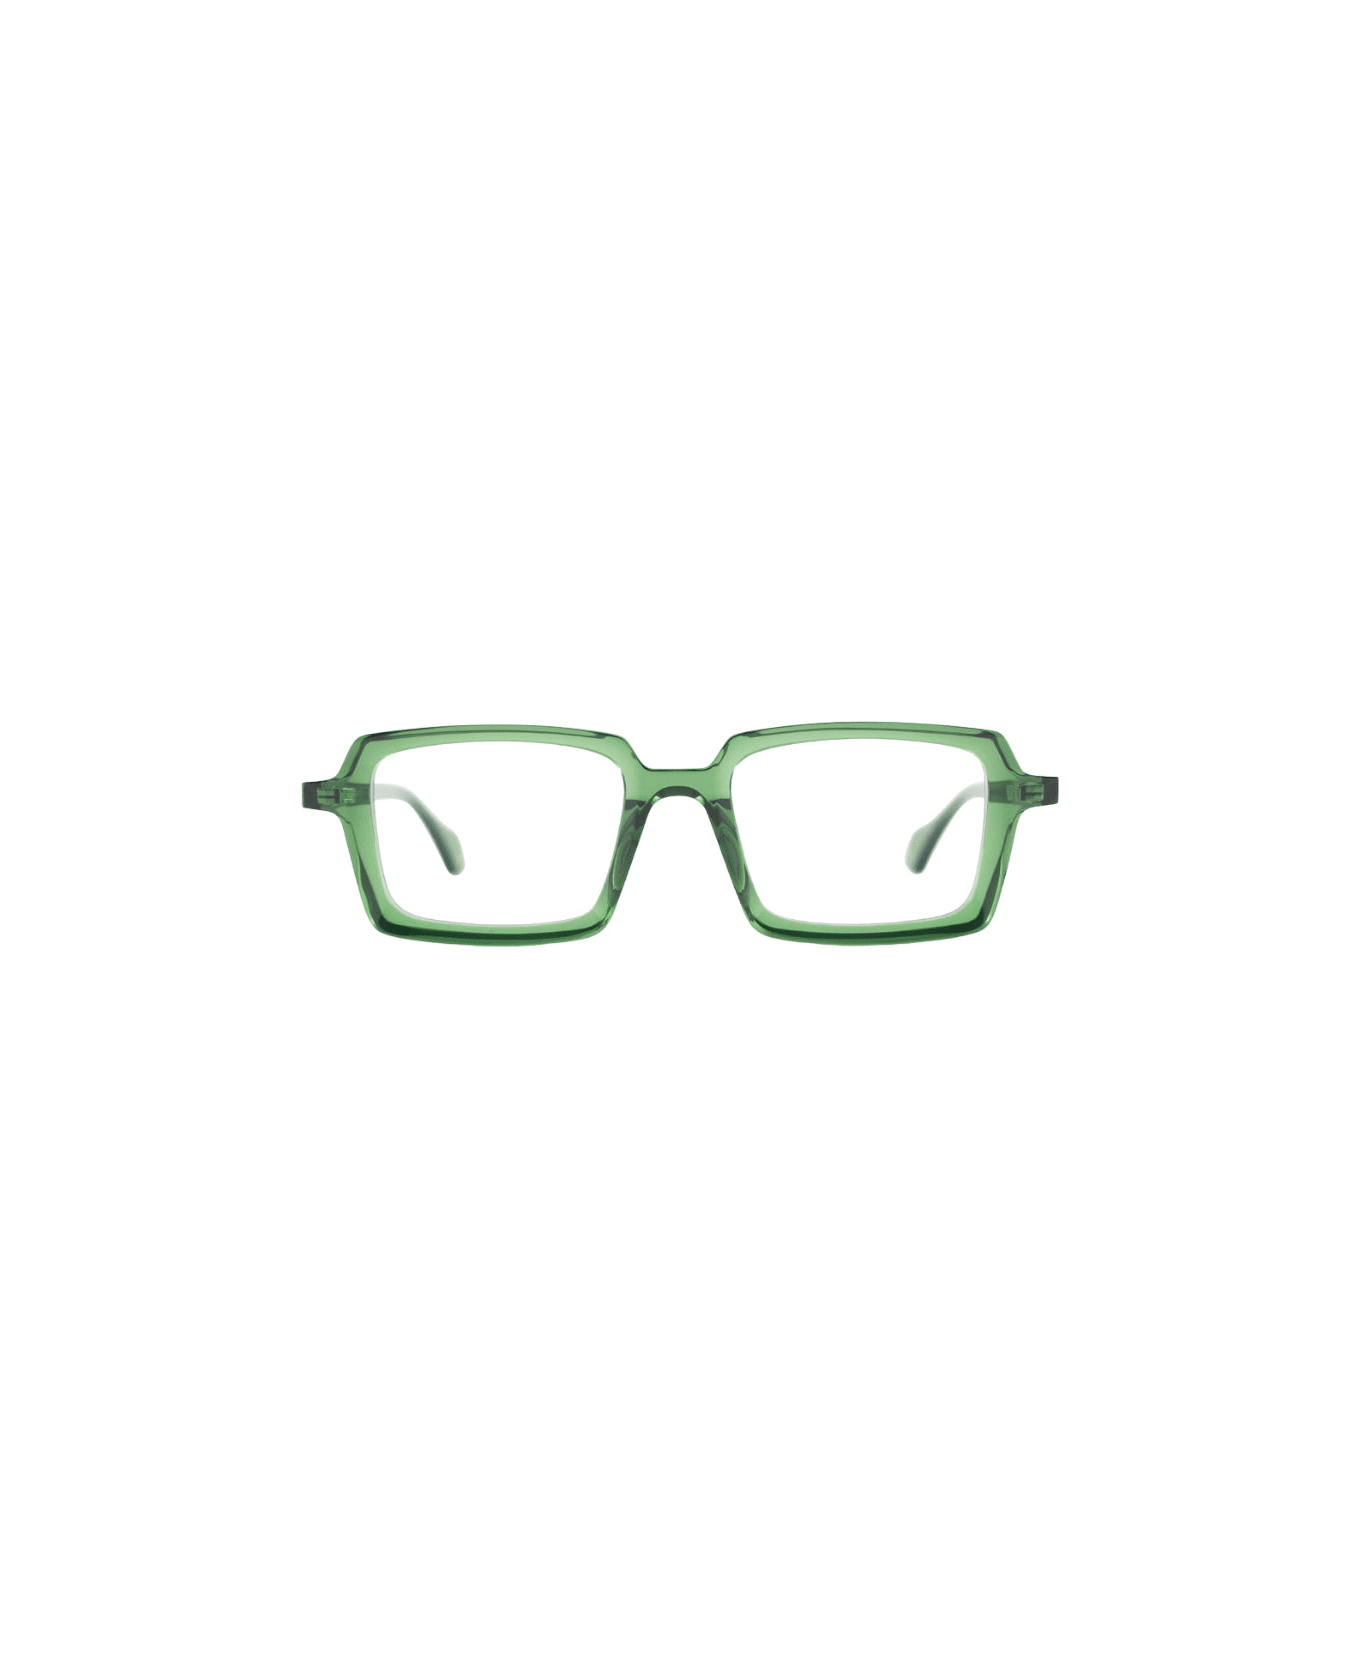 Theo Mille +86 - Trasparent Green Glasses